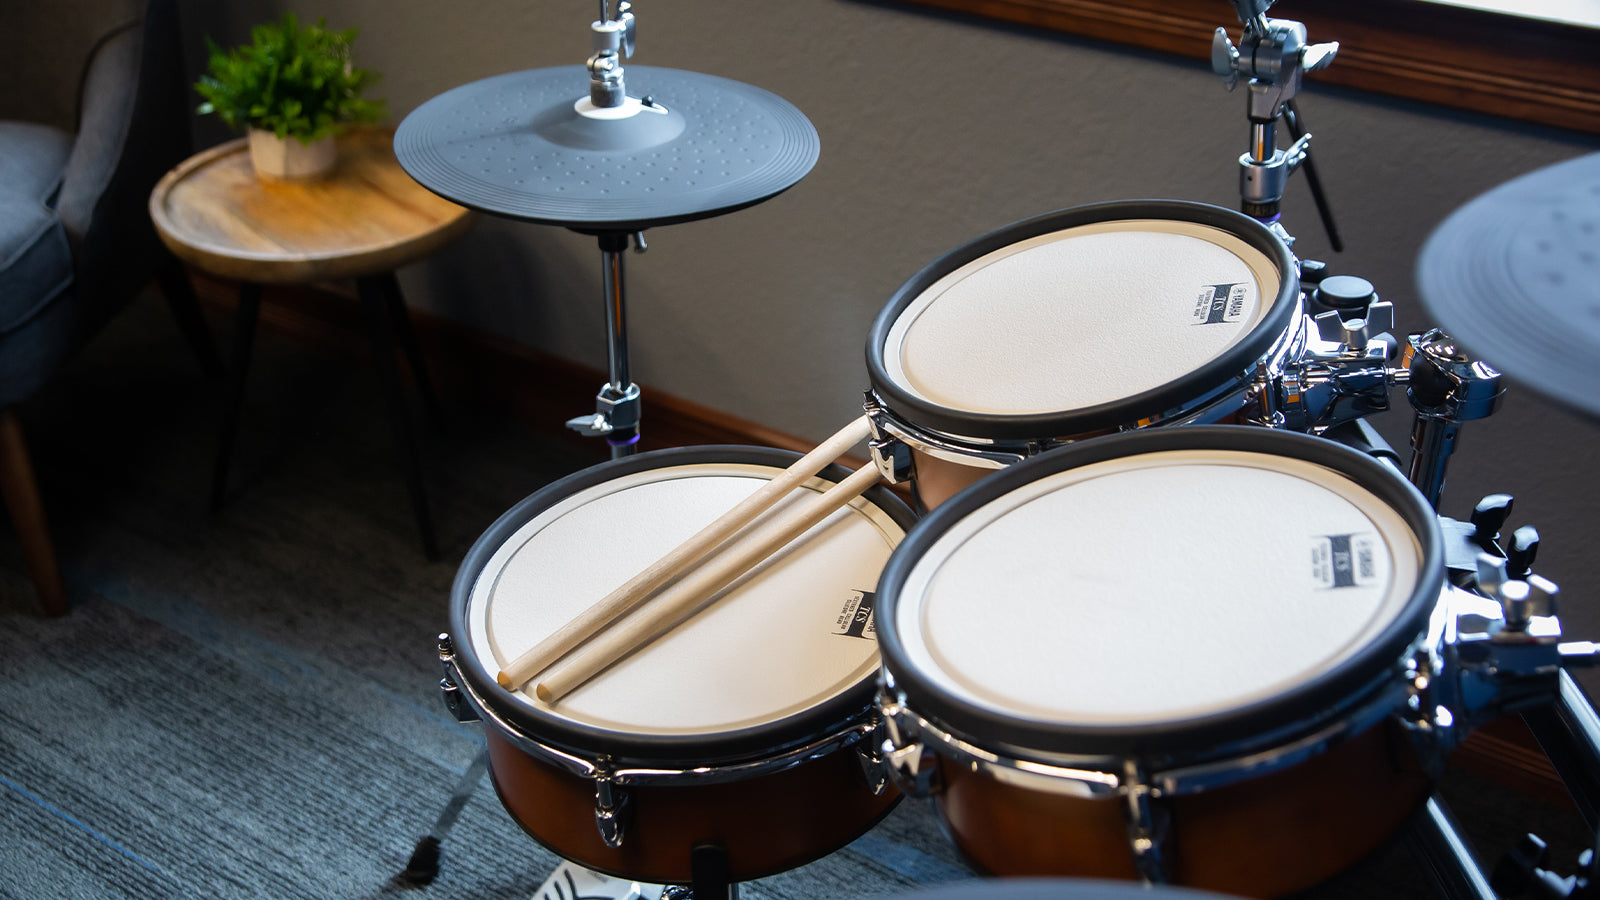 A Yamaha DTX drum set in a stylish living room